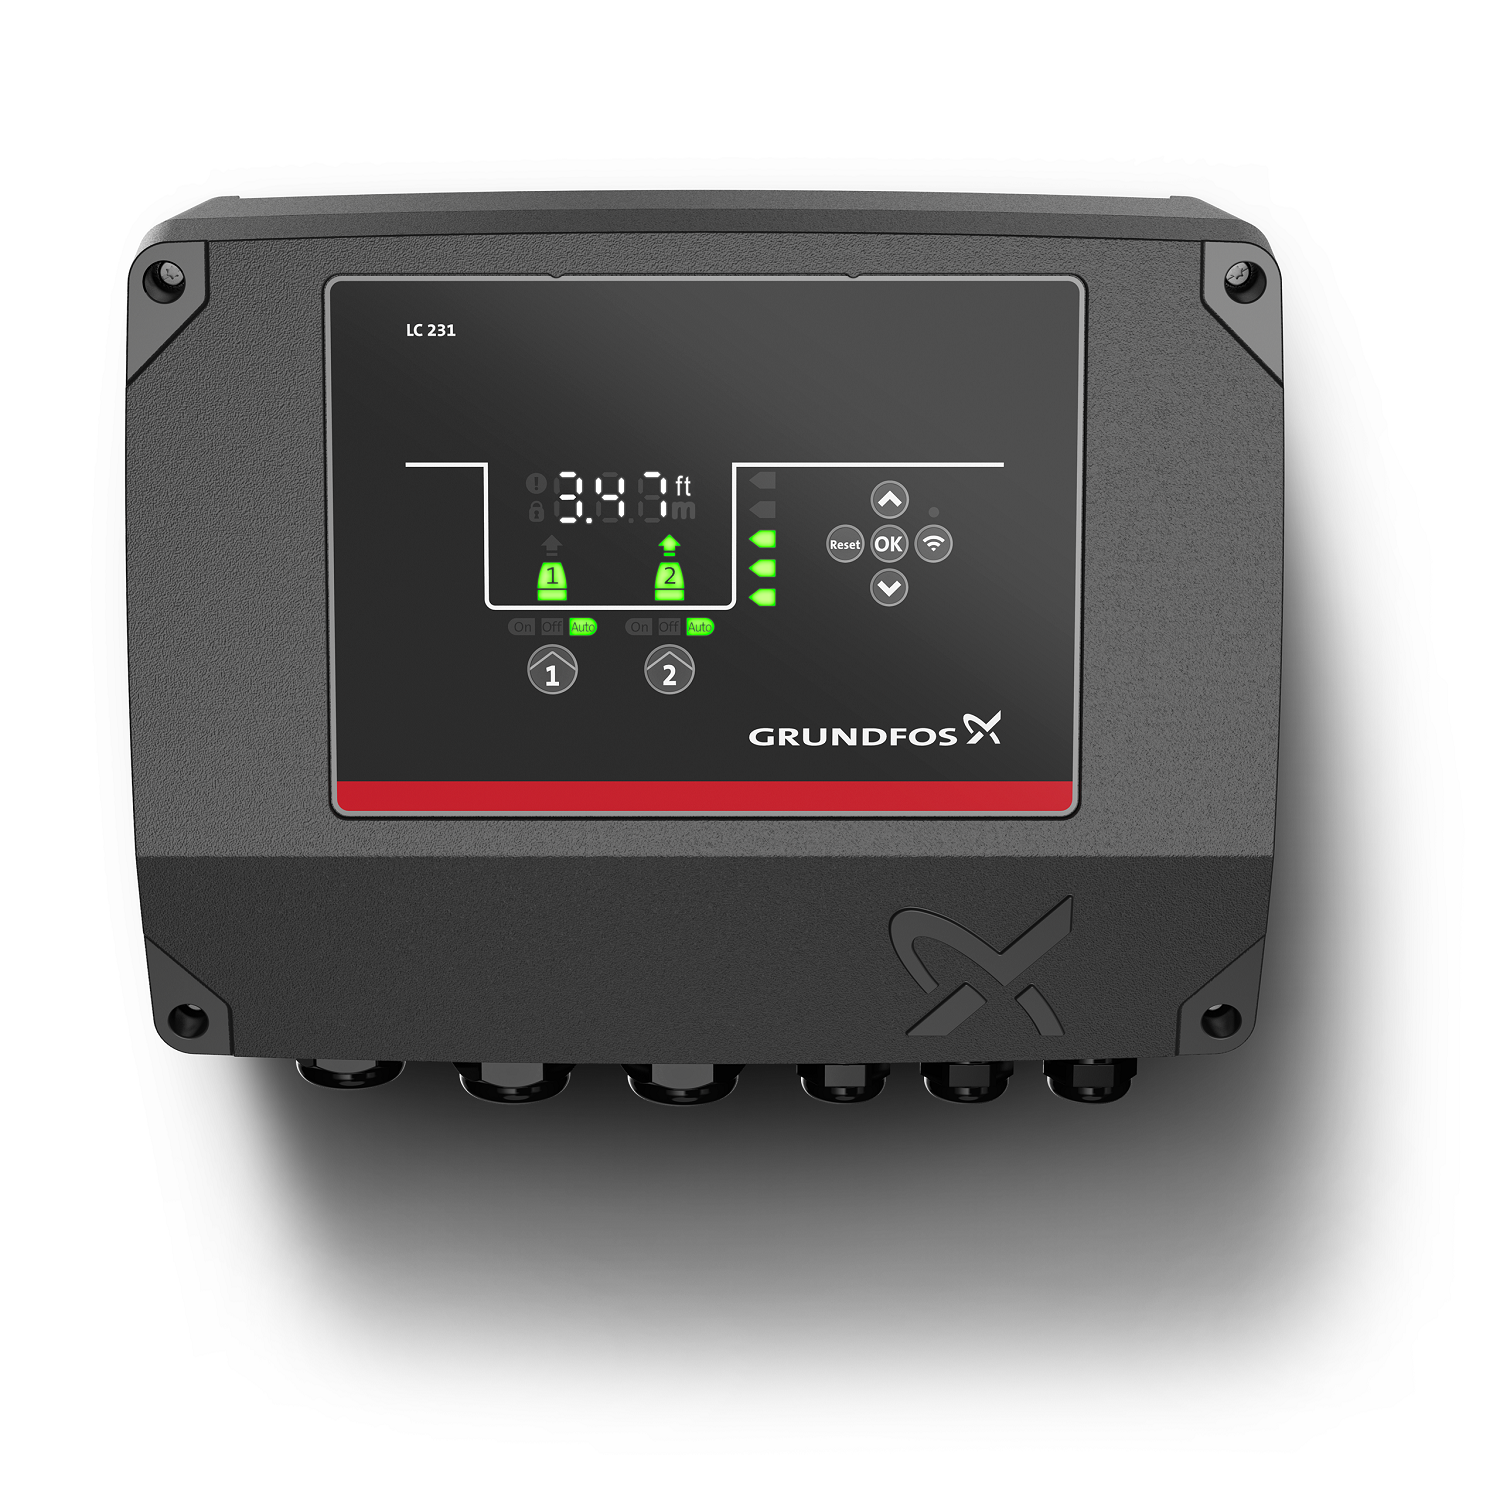 Grundfos will launch its LC 231 and 241 level control panels at WEFTEC.